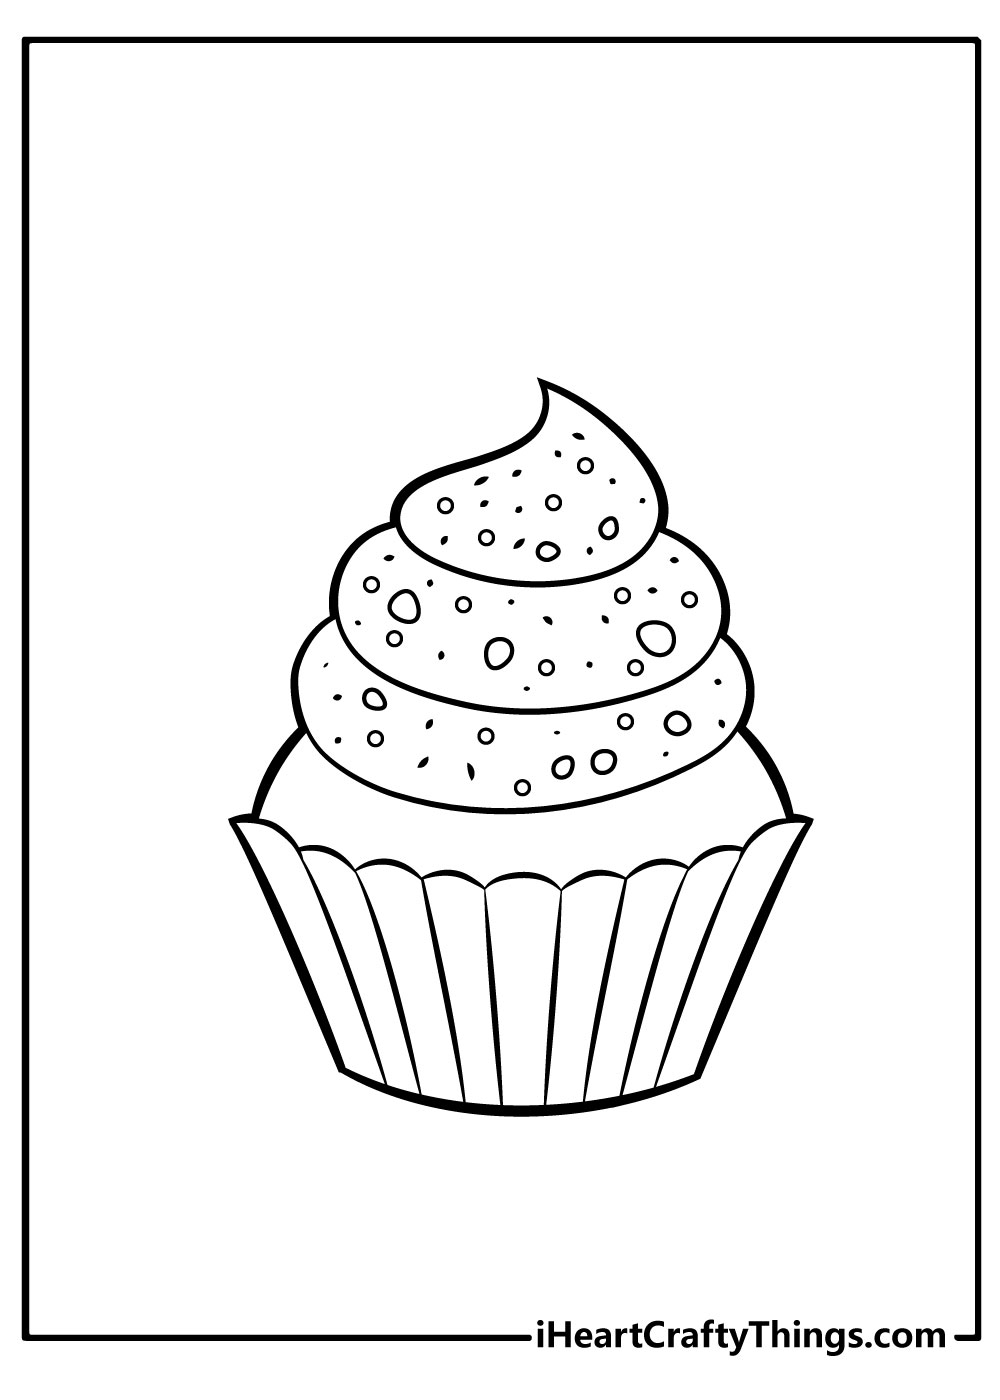 Cupcake coloring pages free printables